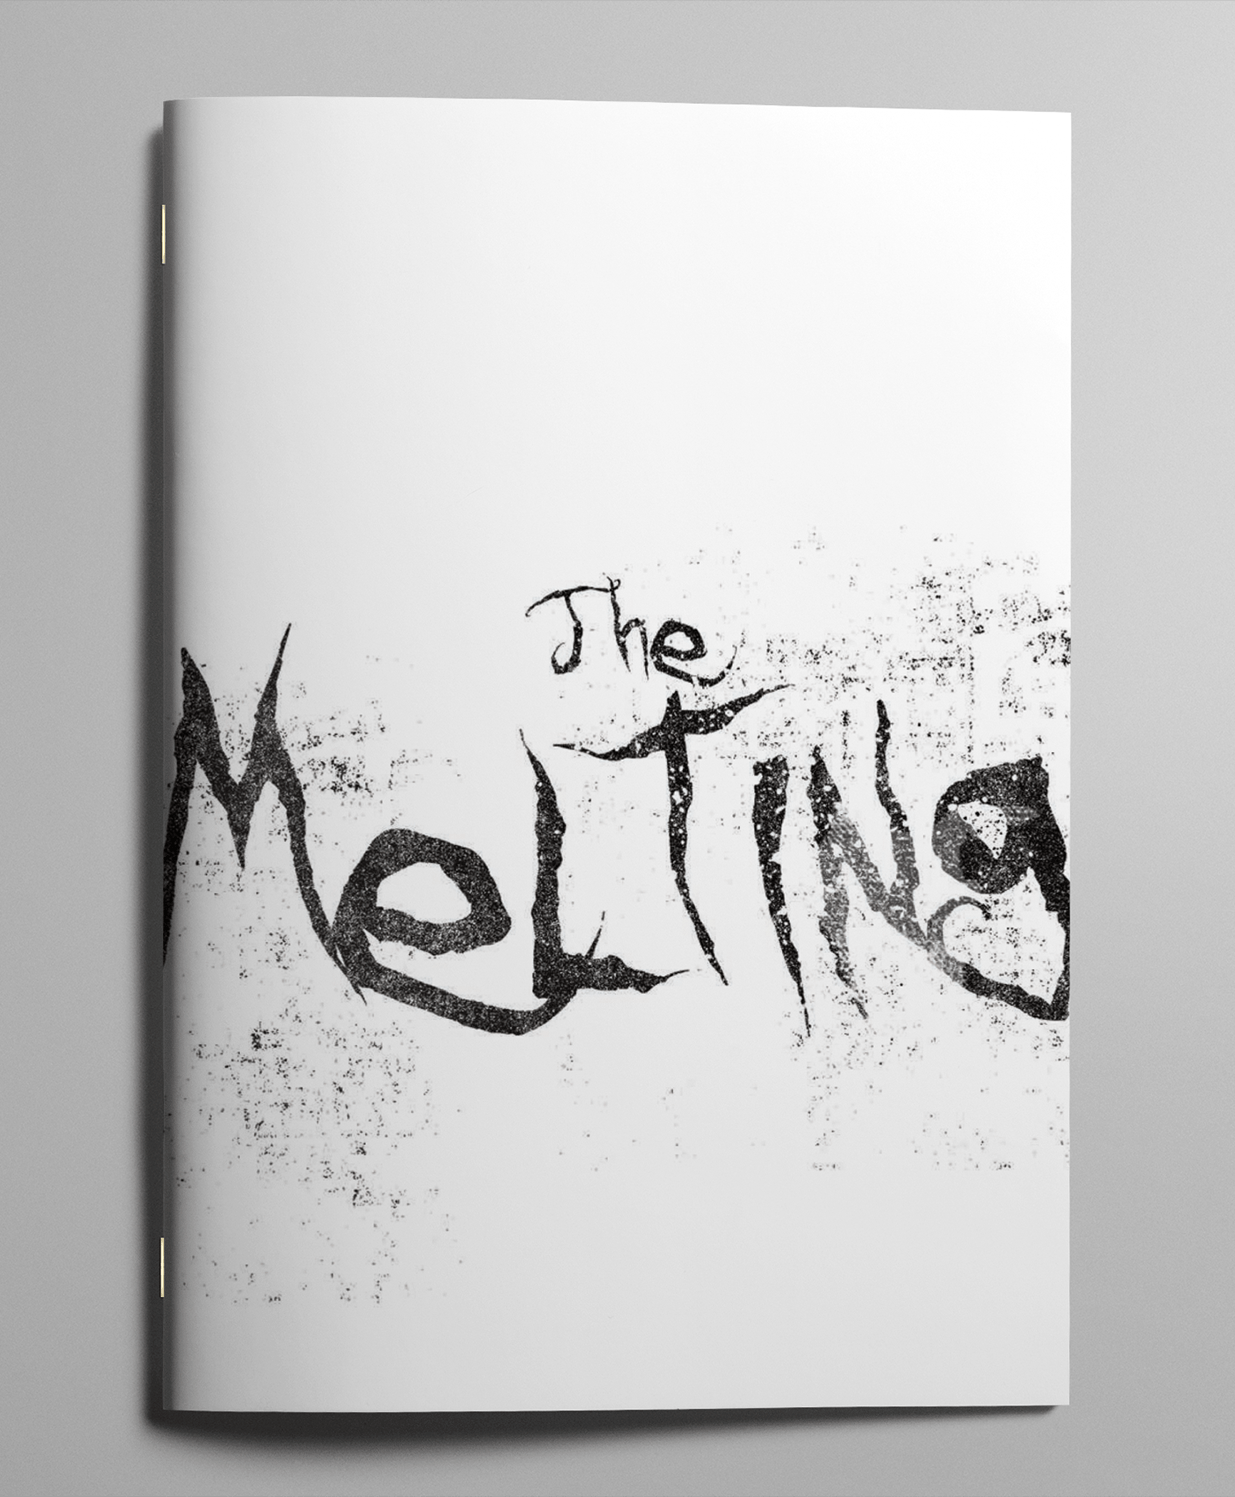 The Melting - Exalted Funeral